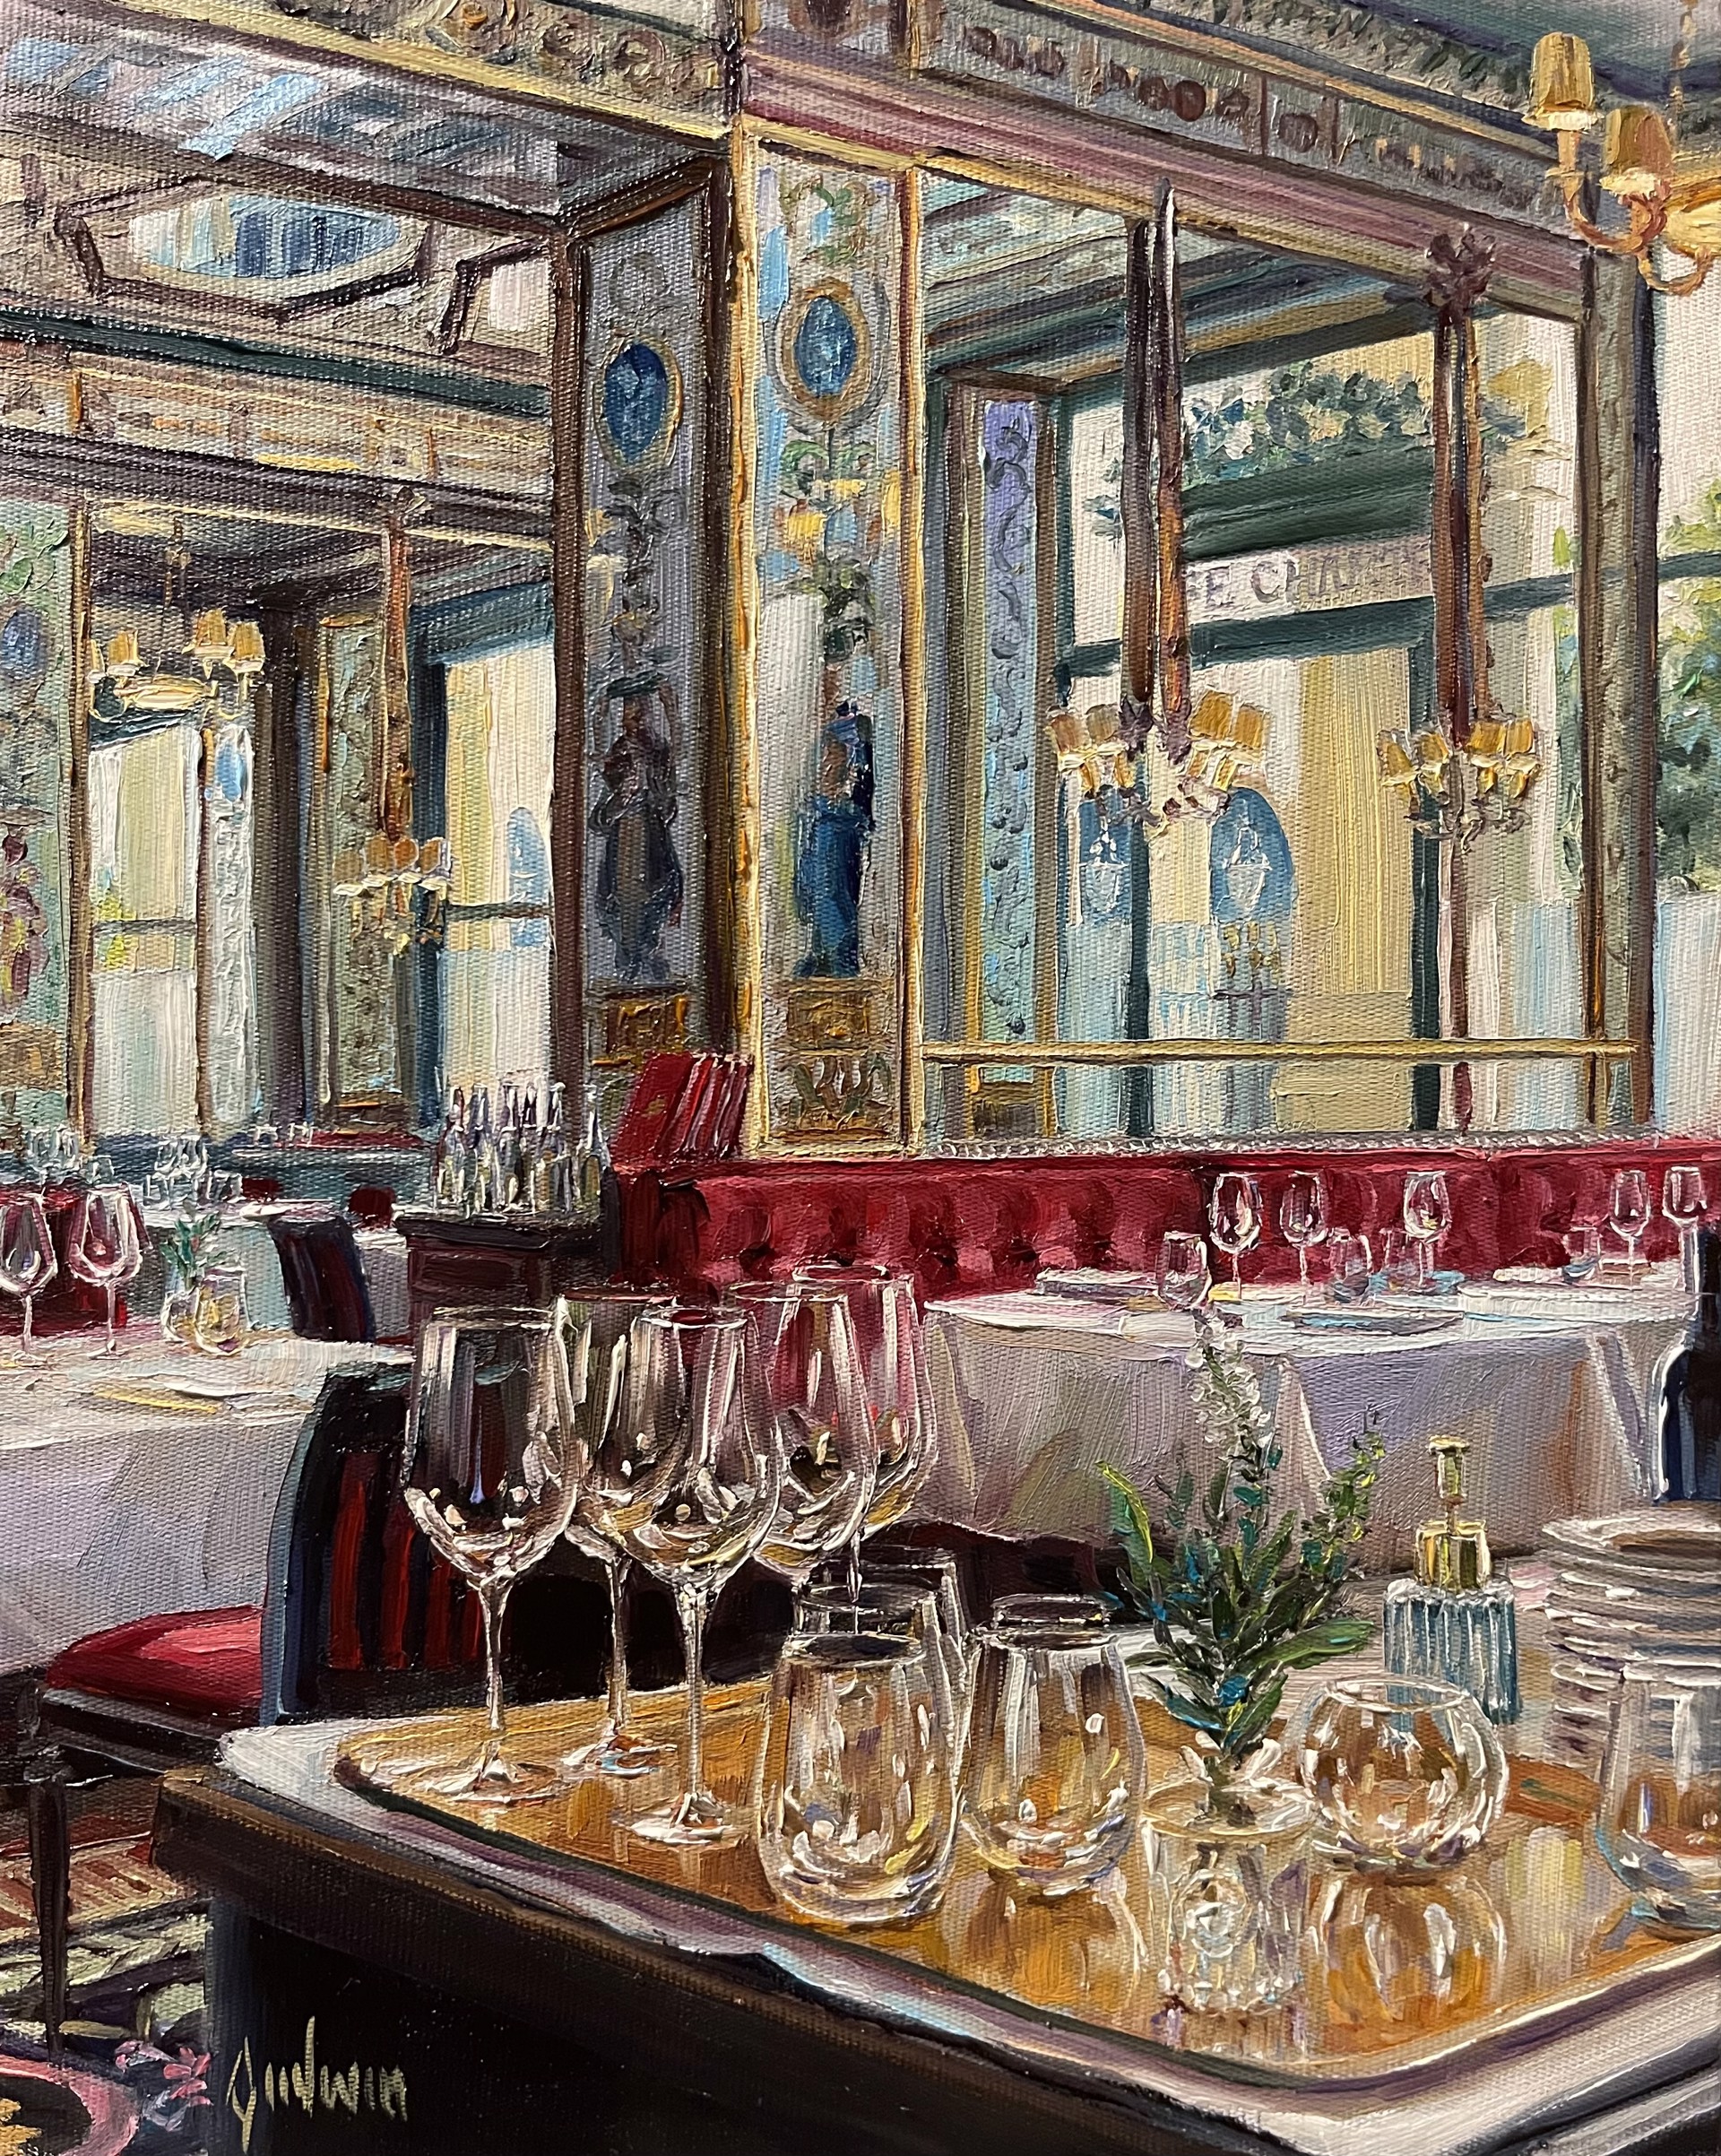 Glass on Golden Tray, Le Grand Vefour Paris, by Lindsay Goodwin